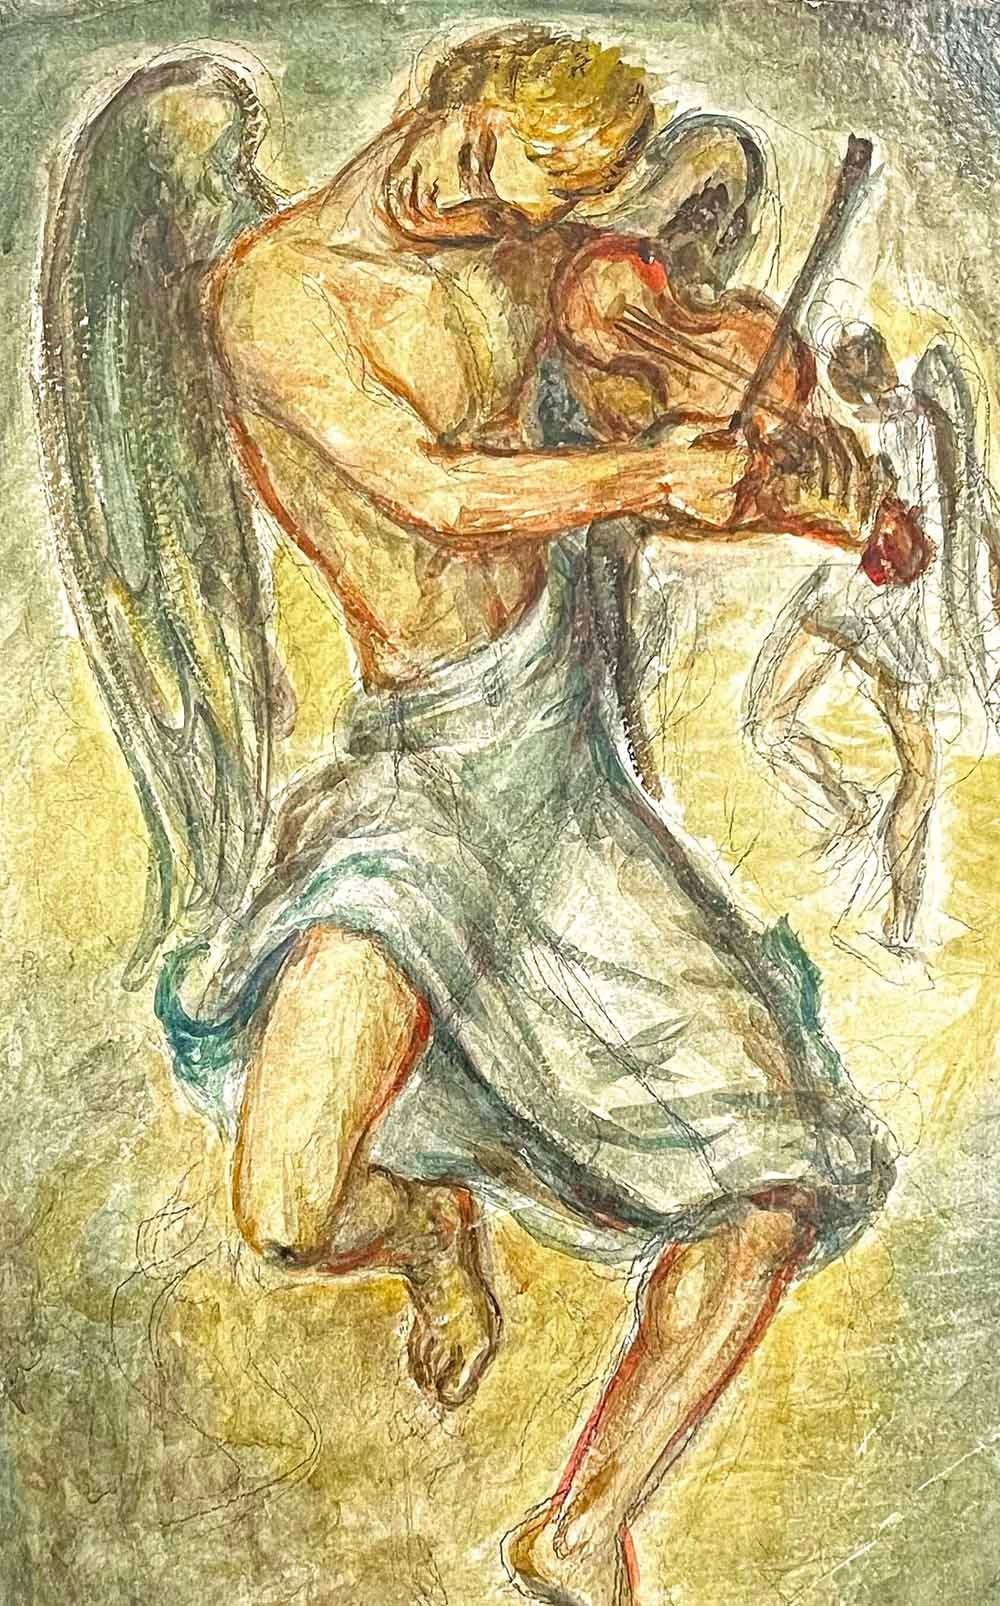 Reminiscent of the work of Jared French in its material (tempera), its color palette and its approach to the male figure, this lovely depiction of two dancing angels, one in the foreground playing fiddle as well, was painted by Robert Somers in